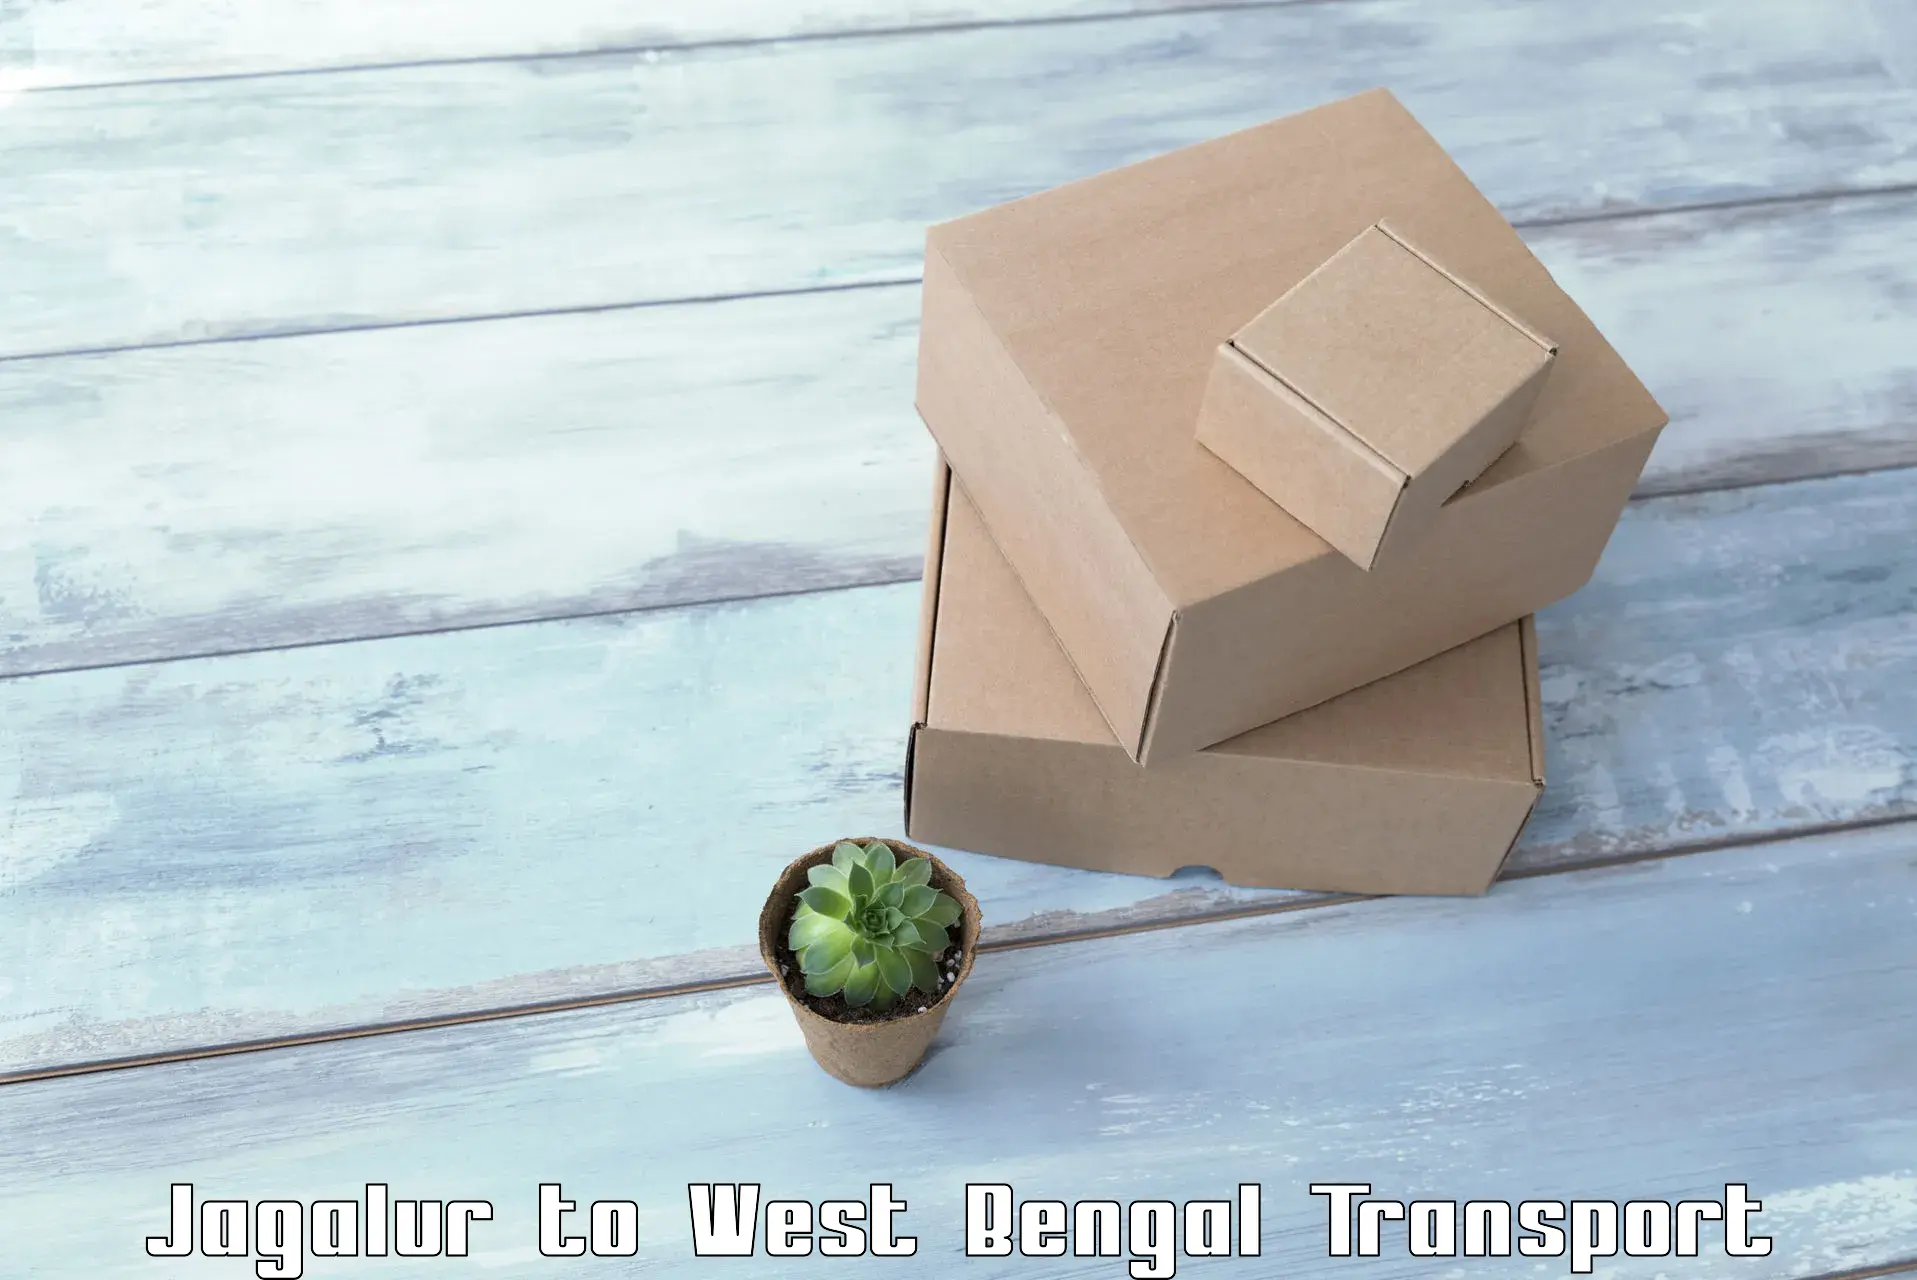 Domestic goods transportation services in Jagalur to Mal Bazar